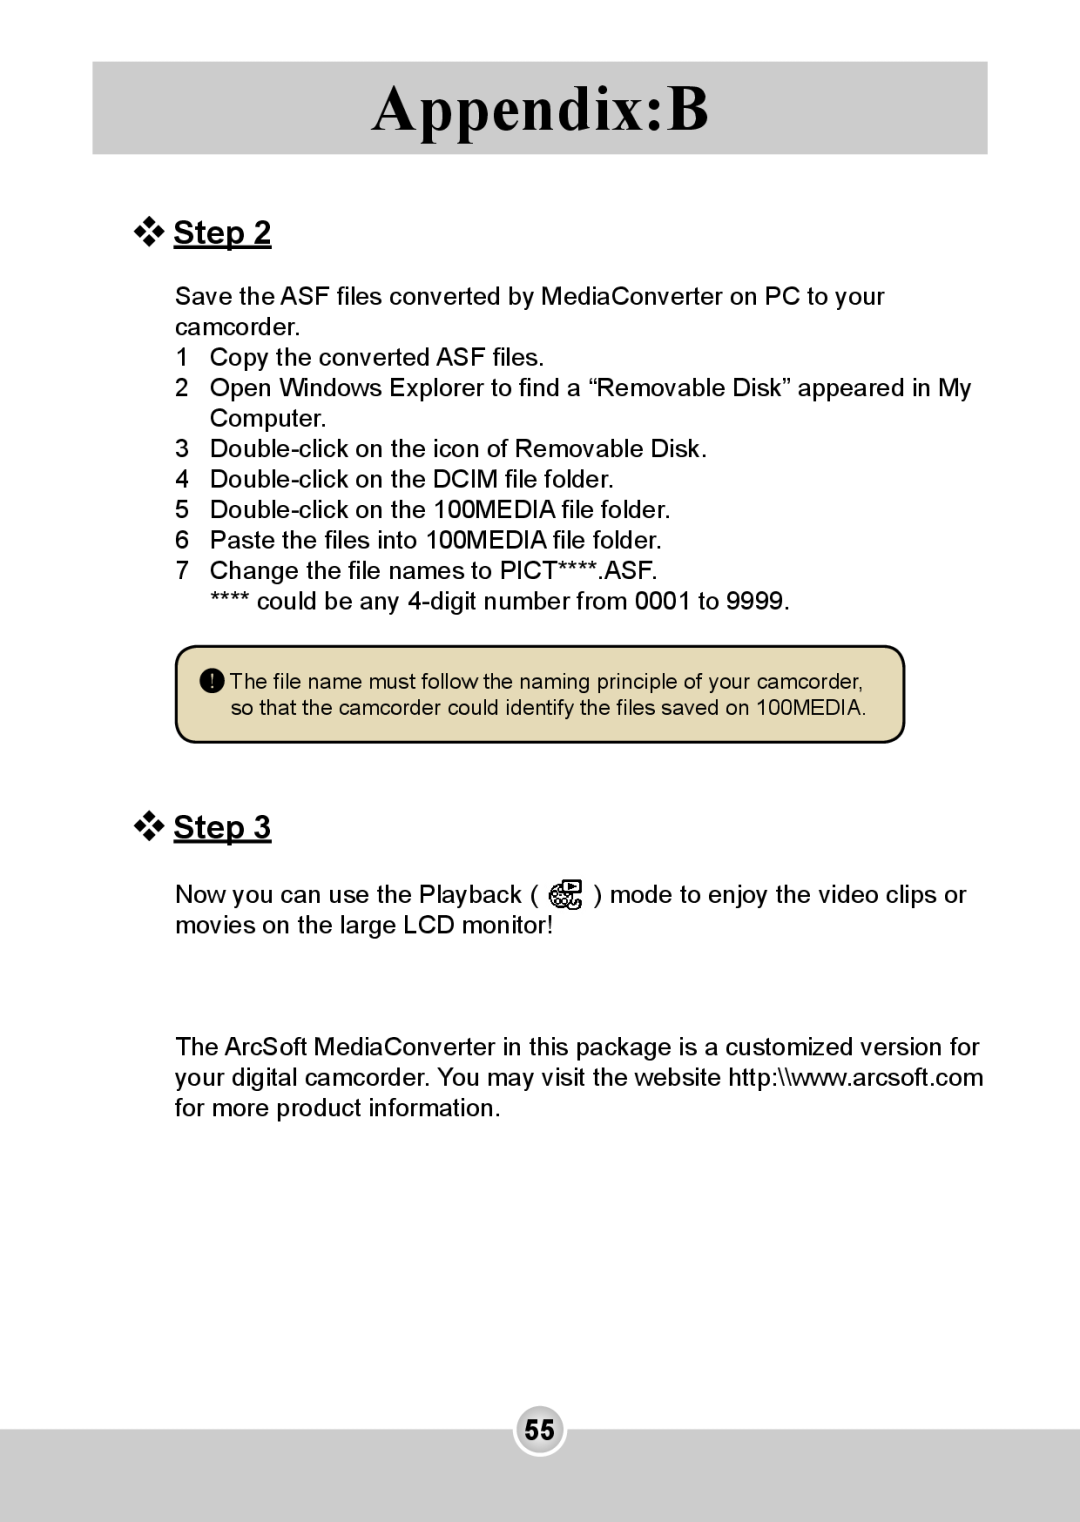 Nokia 6108 manual AppendixB, Step, Save the ASF files converted by MediaConverter on PC to your camcorder 